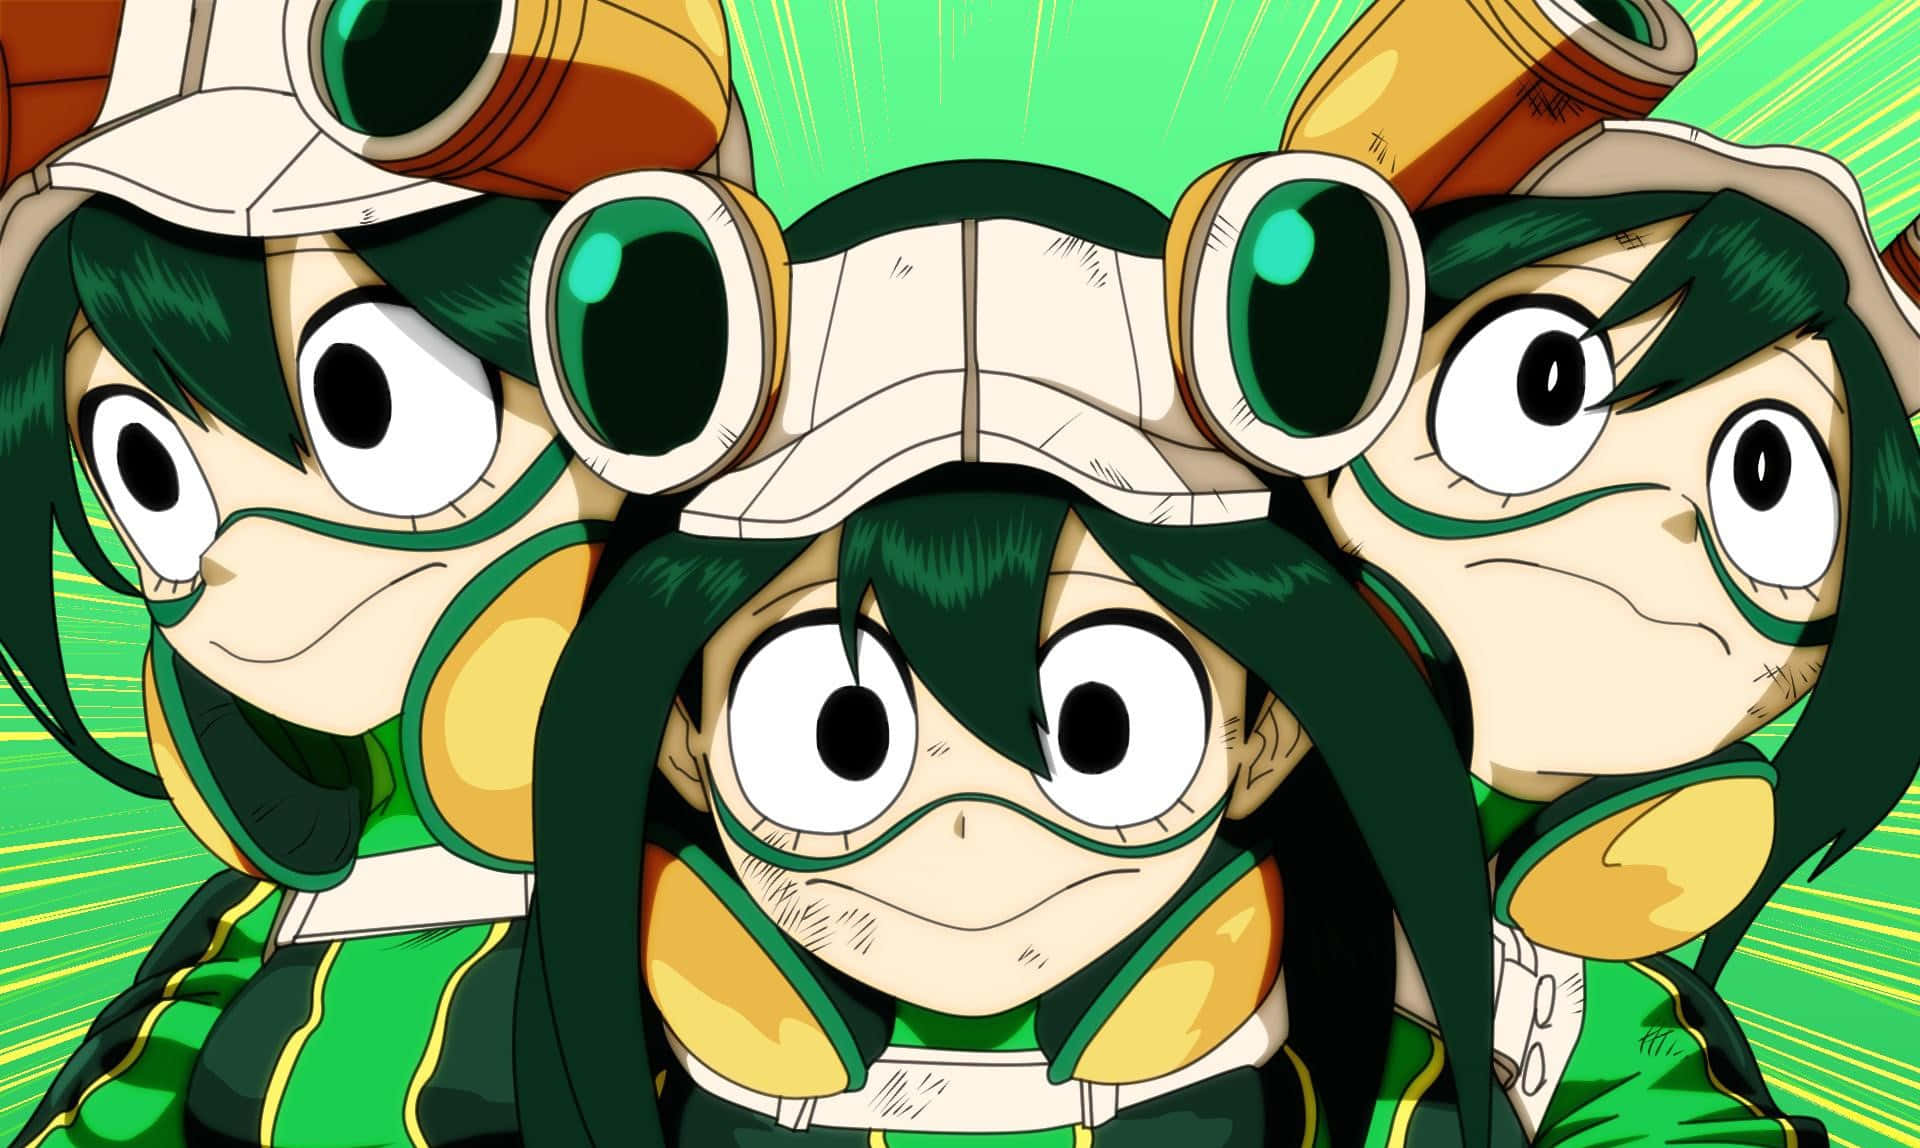 Froppy Sitting in a Flower Bed